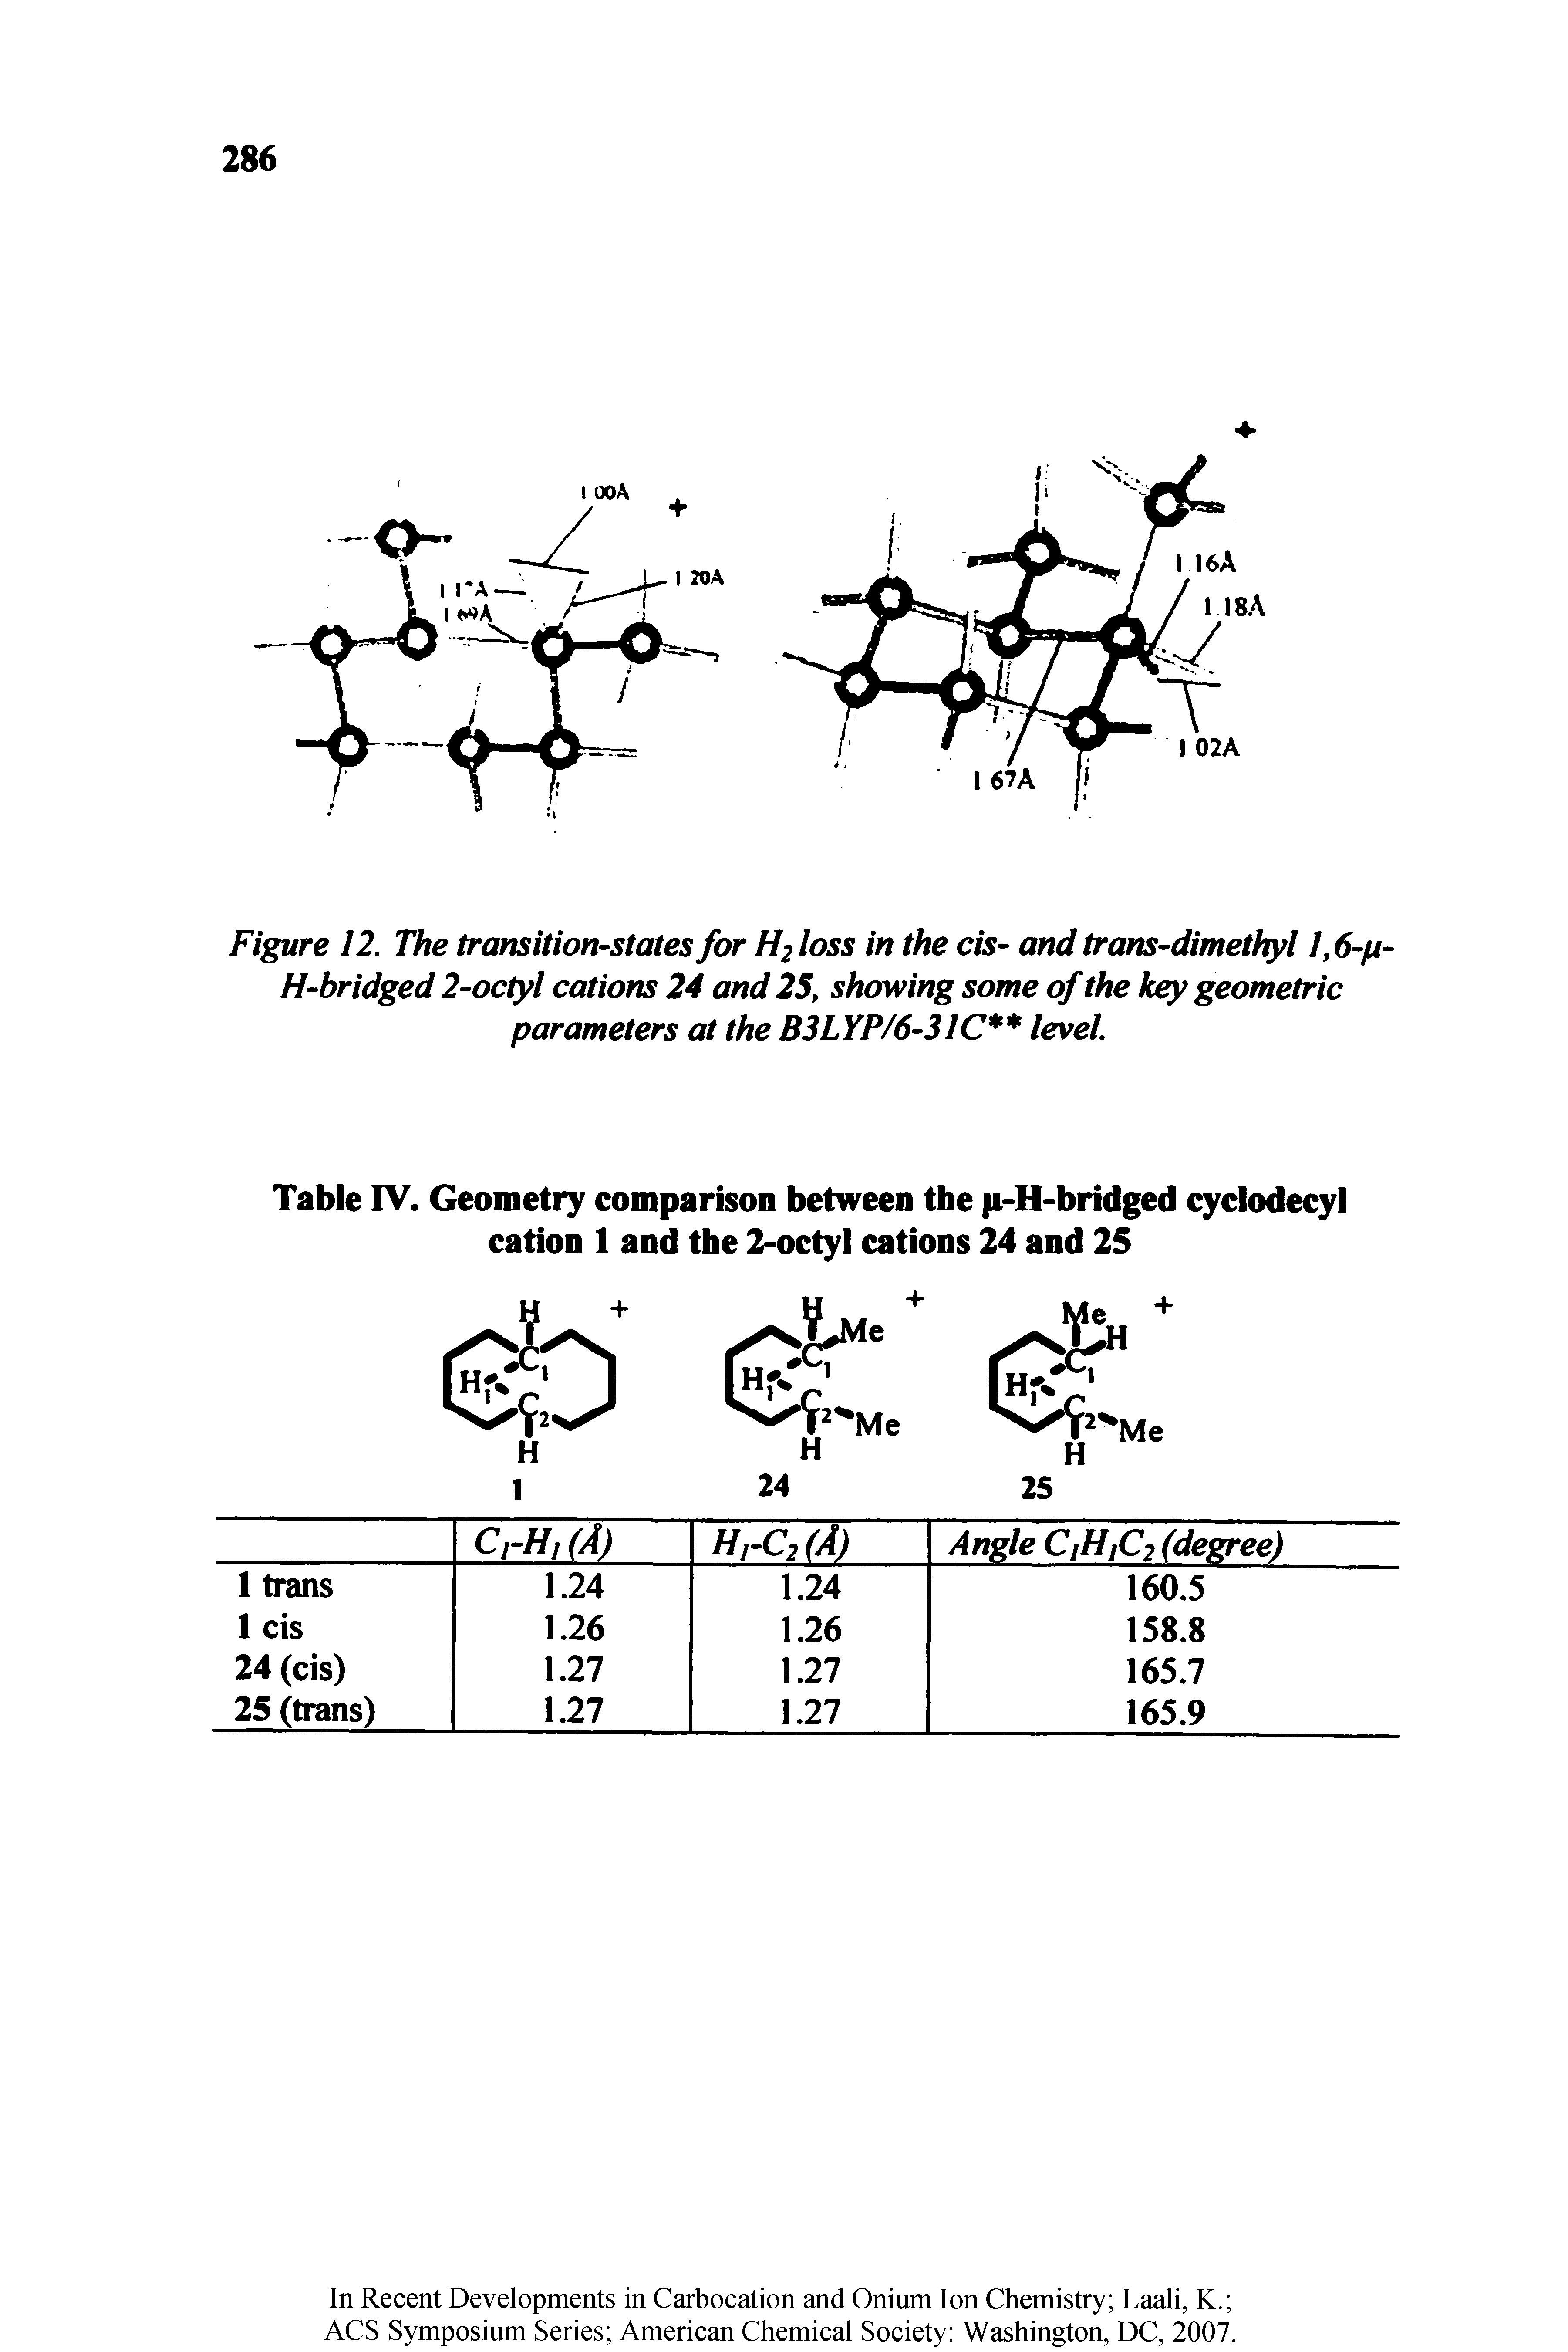 Table IV. Geometry comparison between the p-H-bridged cyclodecyl cation 1 and the 2-octyl cations 24 and 25...